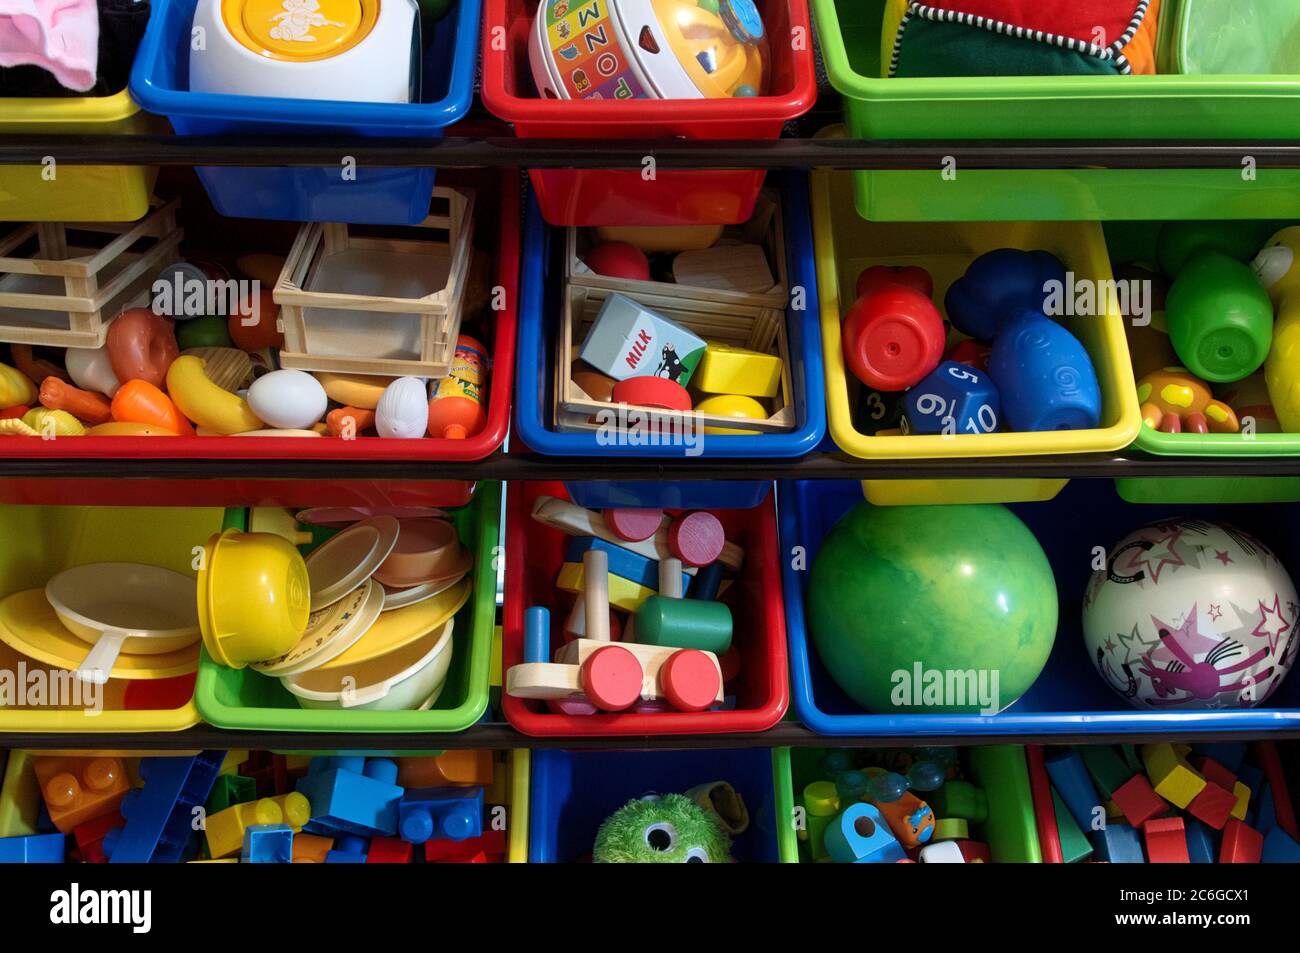 Many children's toys separated and organized in colorful bins. Stock Photo